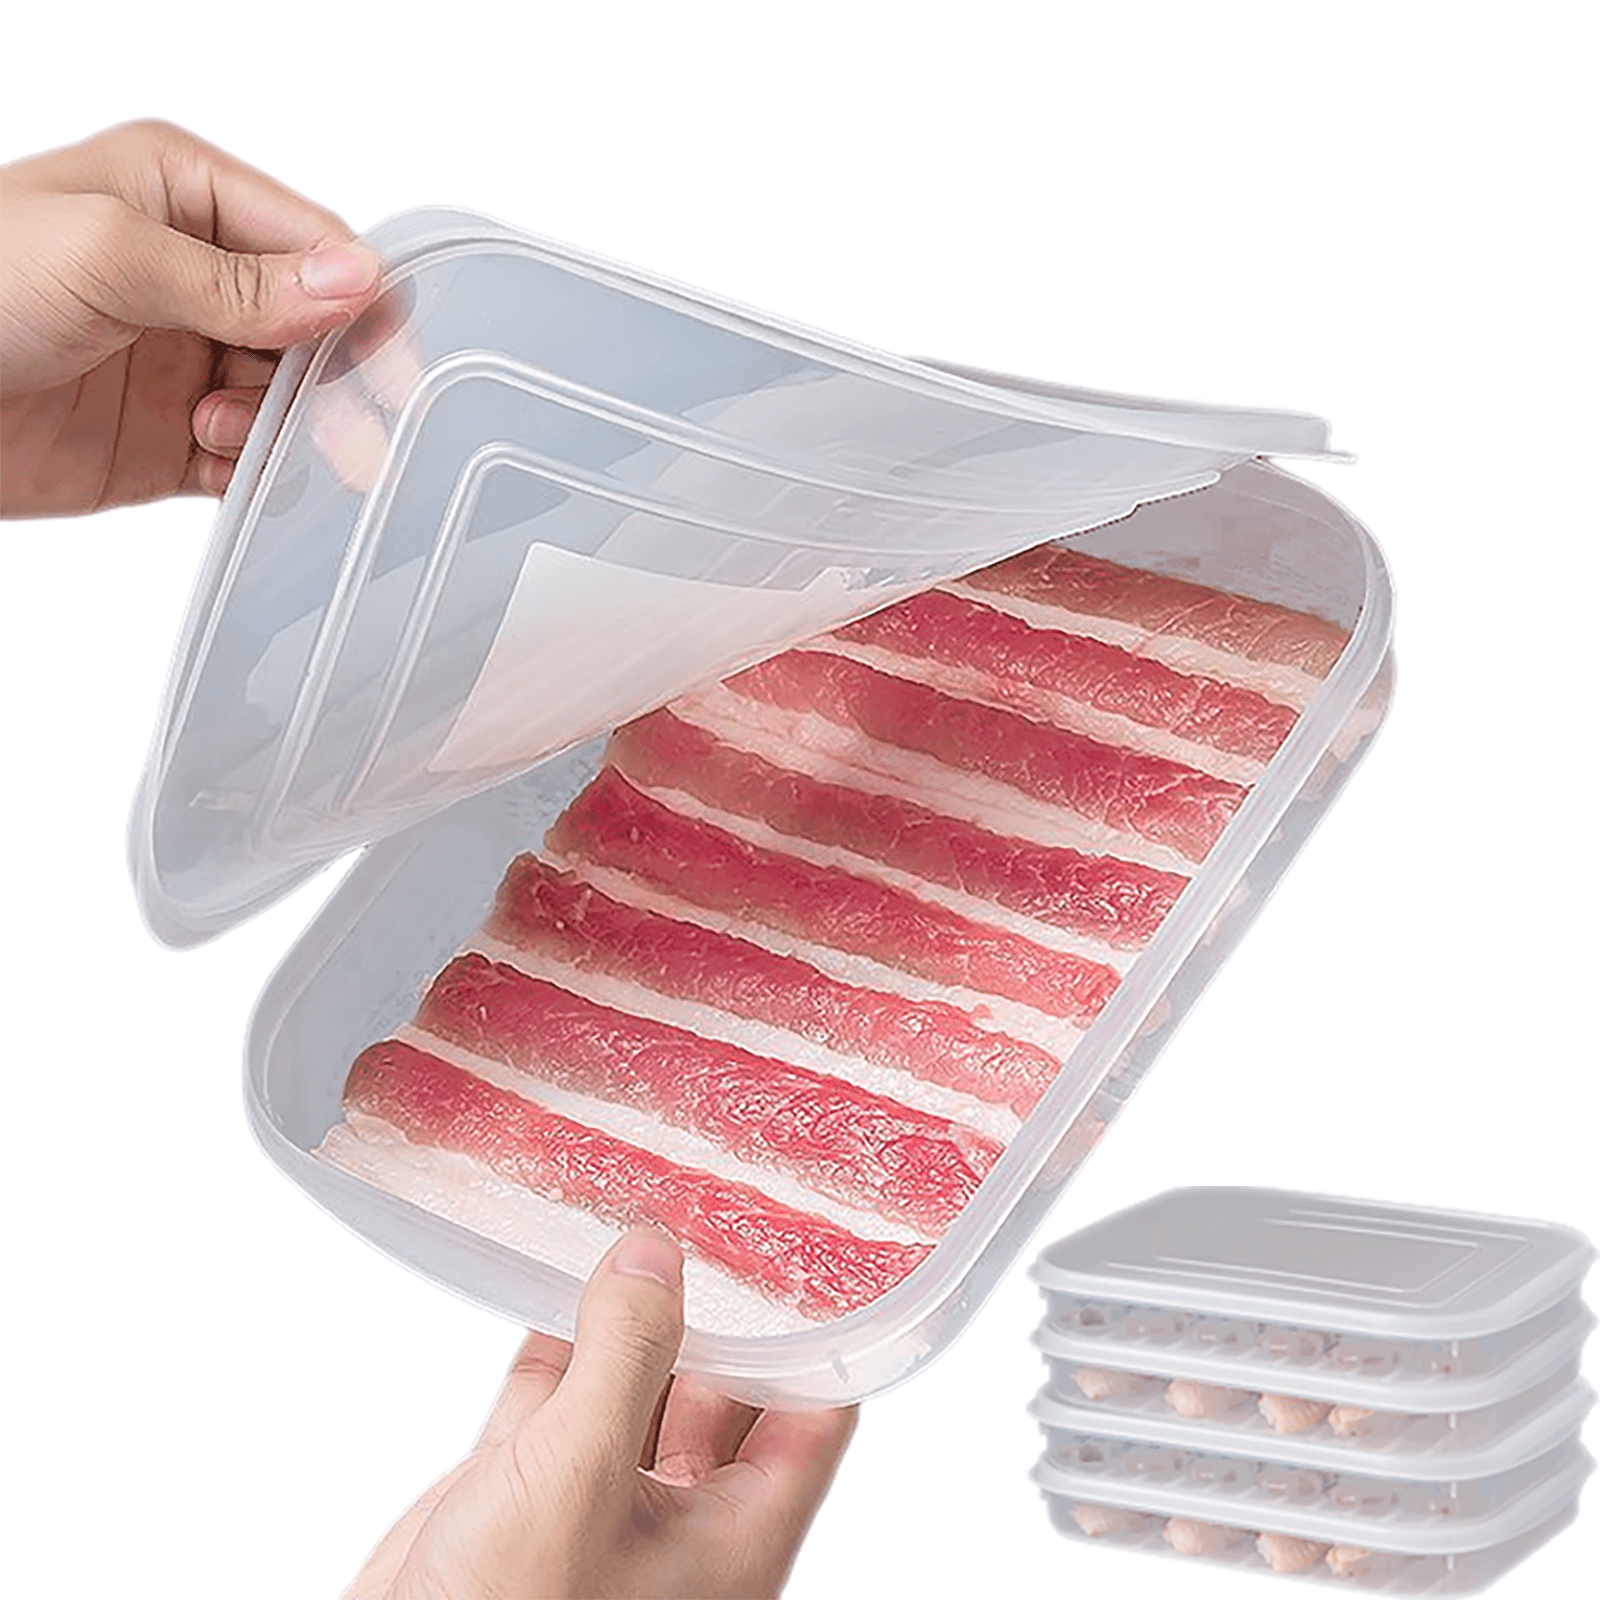 4 Pack-Bacon Keeper, Deli Meat Saver Cheese Cold Cuts Plastic Food Storage Containers with Lids for Refrigerators,Lunch Box Christmas Cookie Holder